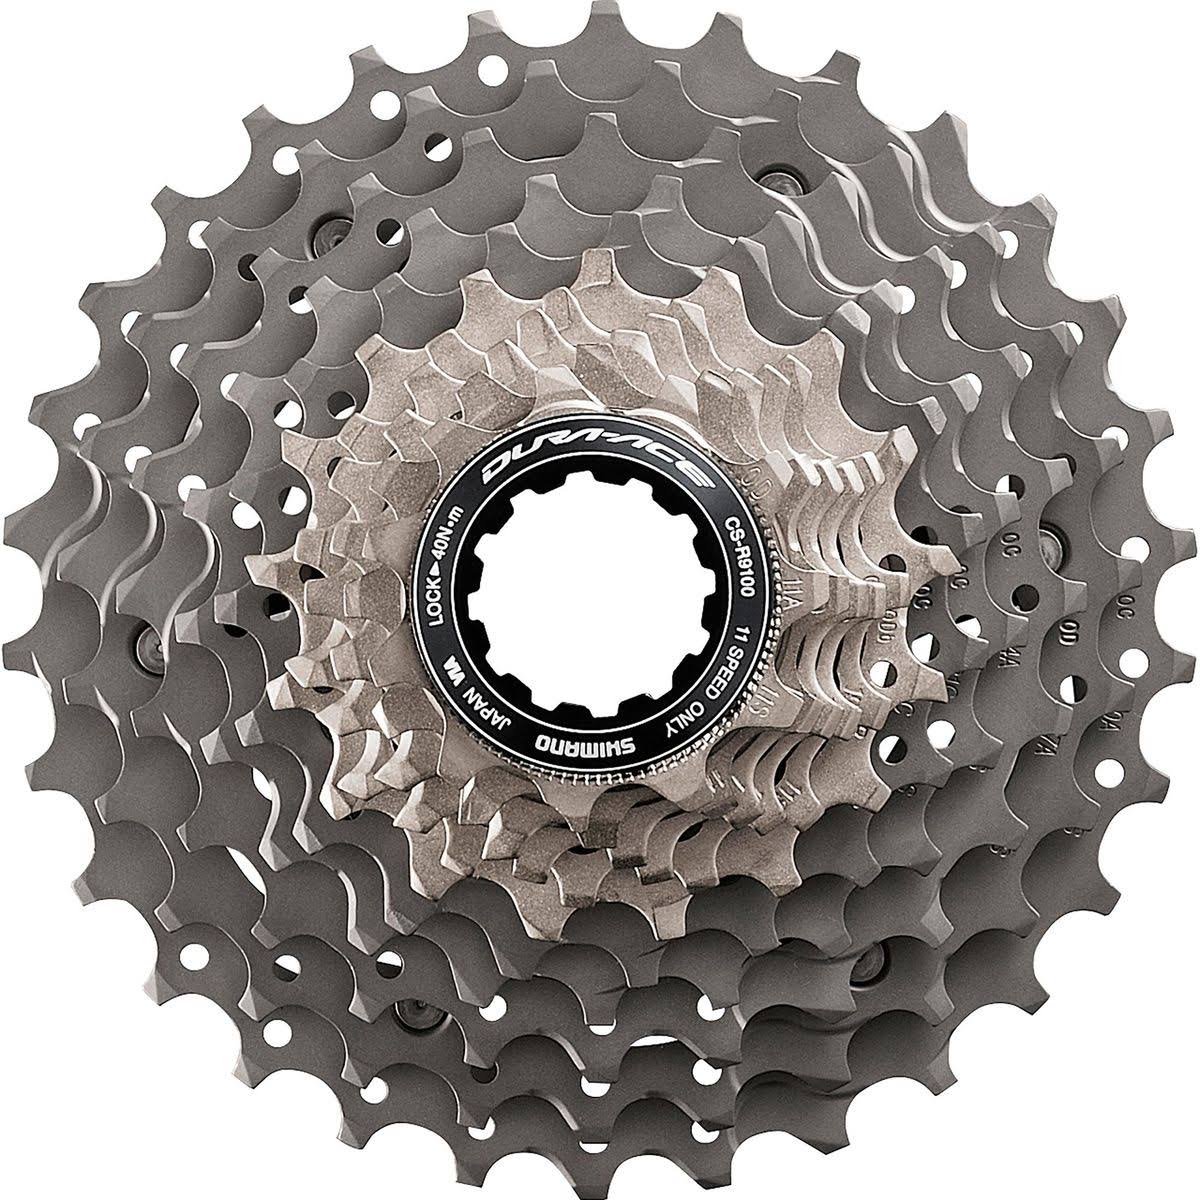 Shimano Dura-Ace R9100 Cassette - 11 Speed